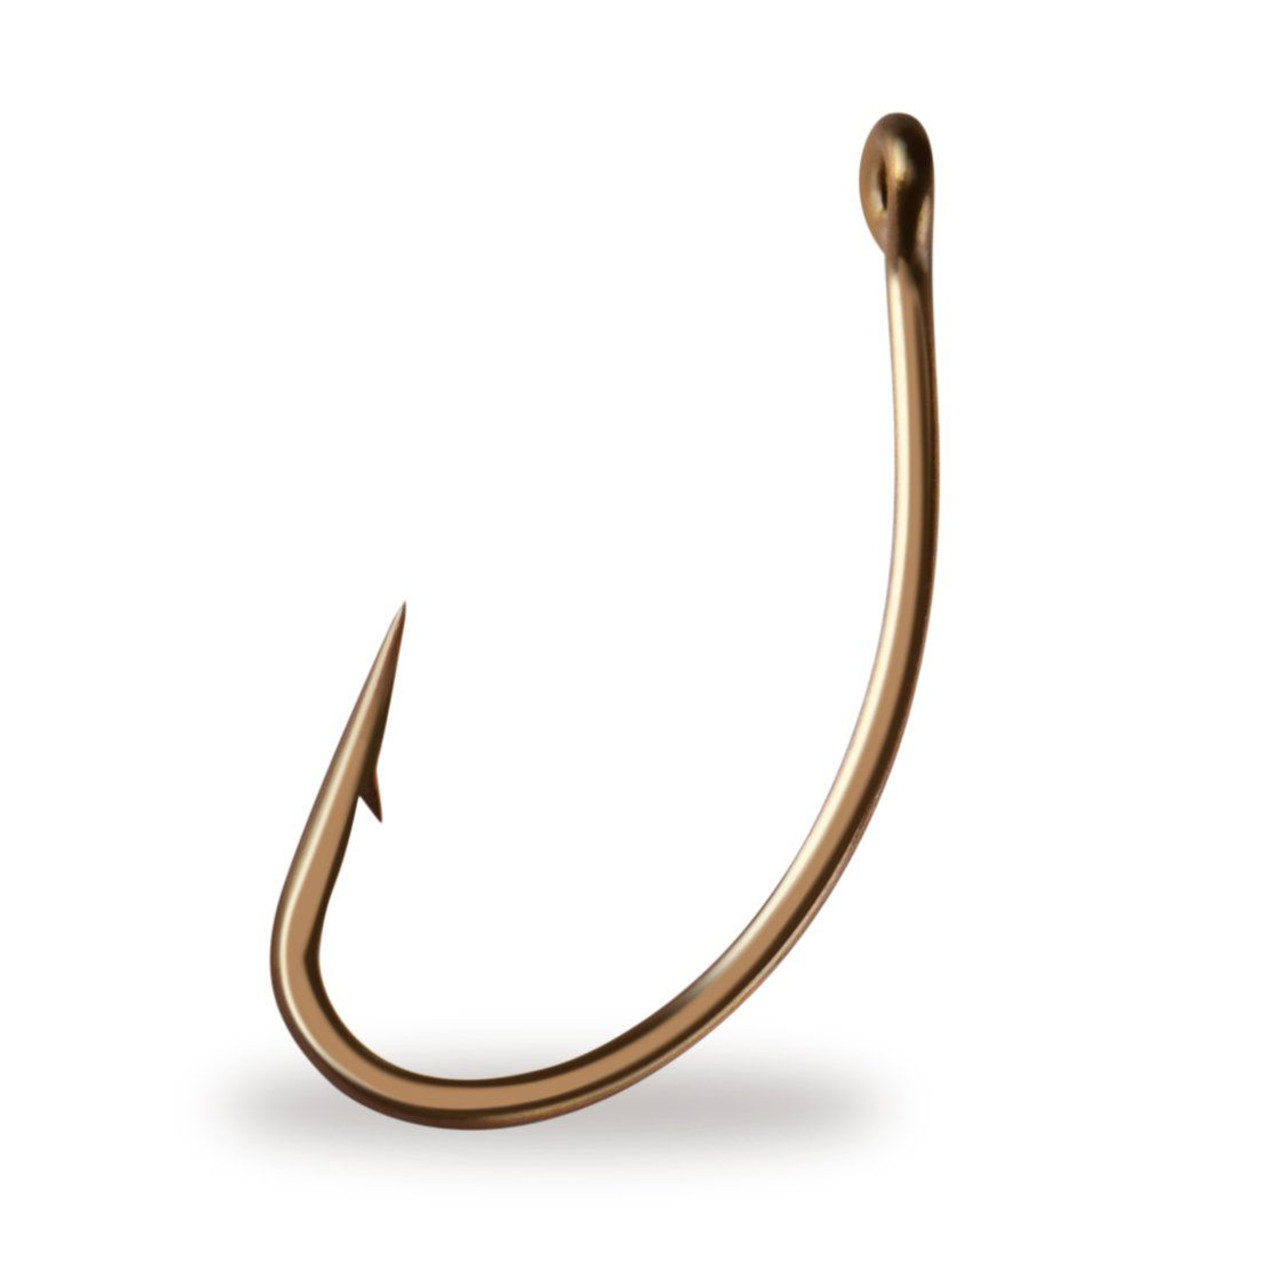 https://cdn11.bigcommerce.com/s-i6ykqoitnd/images/stencil/1280x1280/products/10438/55332/mustad-signature-caddis-fly-hook-curved-c49snp-br-fly-hooks-mustad-494851__12557.1639601129.jpg?c=1&imbypass=on